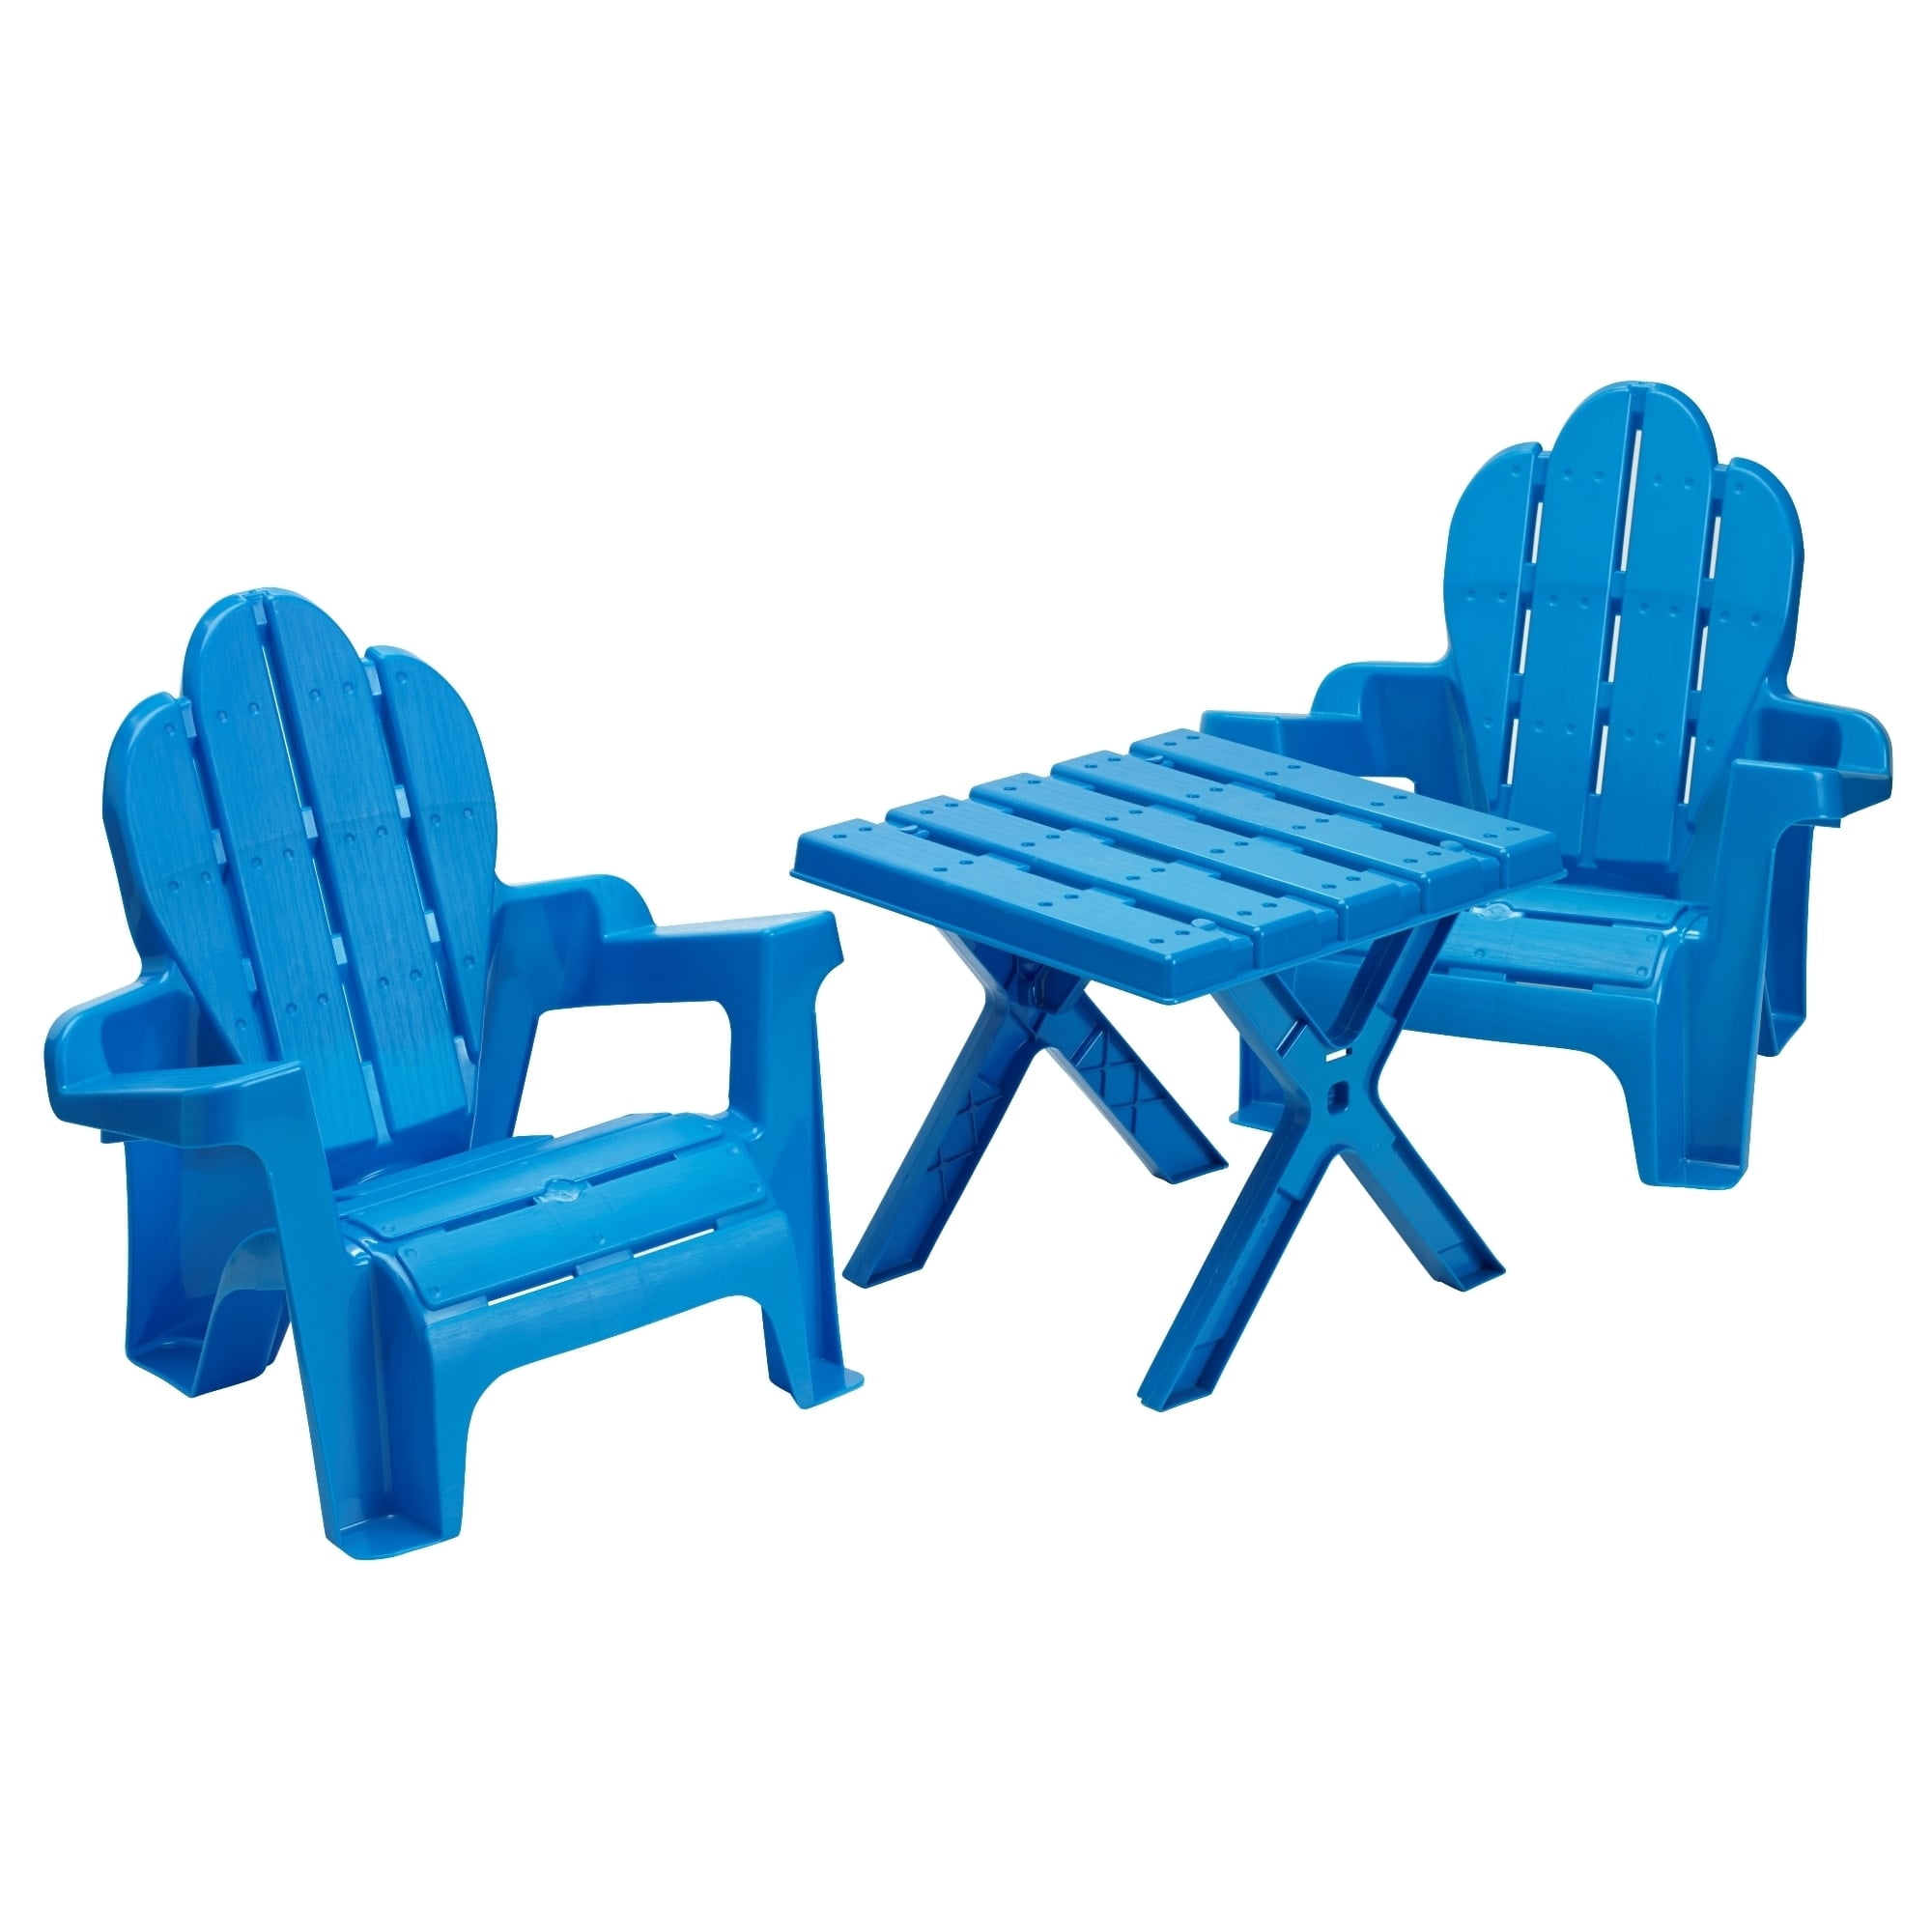 Wide Armrests Portable Outdoor Backyard Blue Stackable Lawn American Plastic Toys Kids’ Adirondack Chairs Indoor Beach Lightweight Pack of 2 Comfortable Lounge Chairs for Children